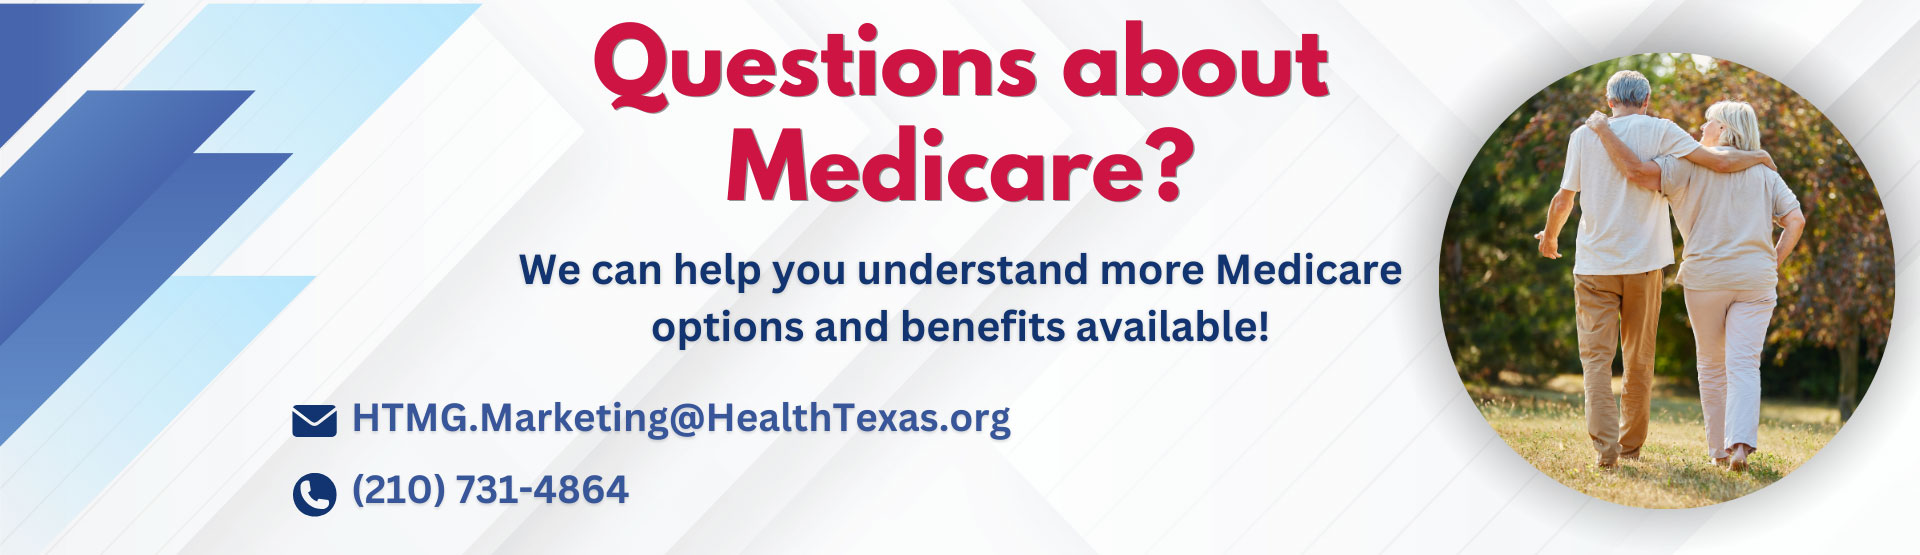 Questions about medicare web banner